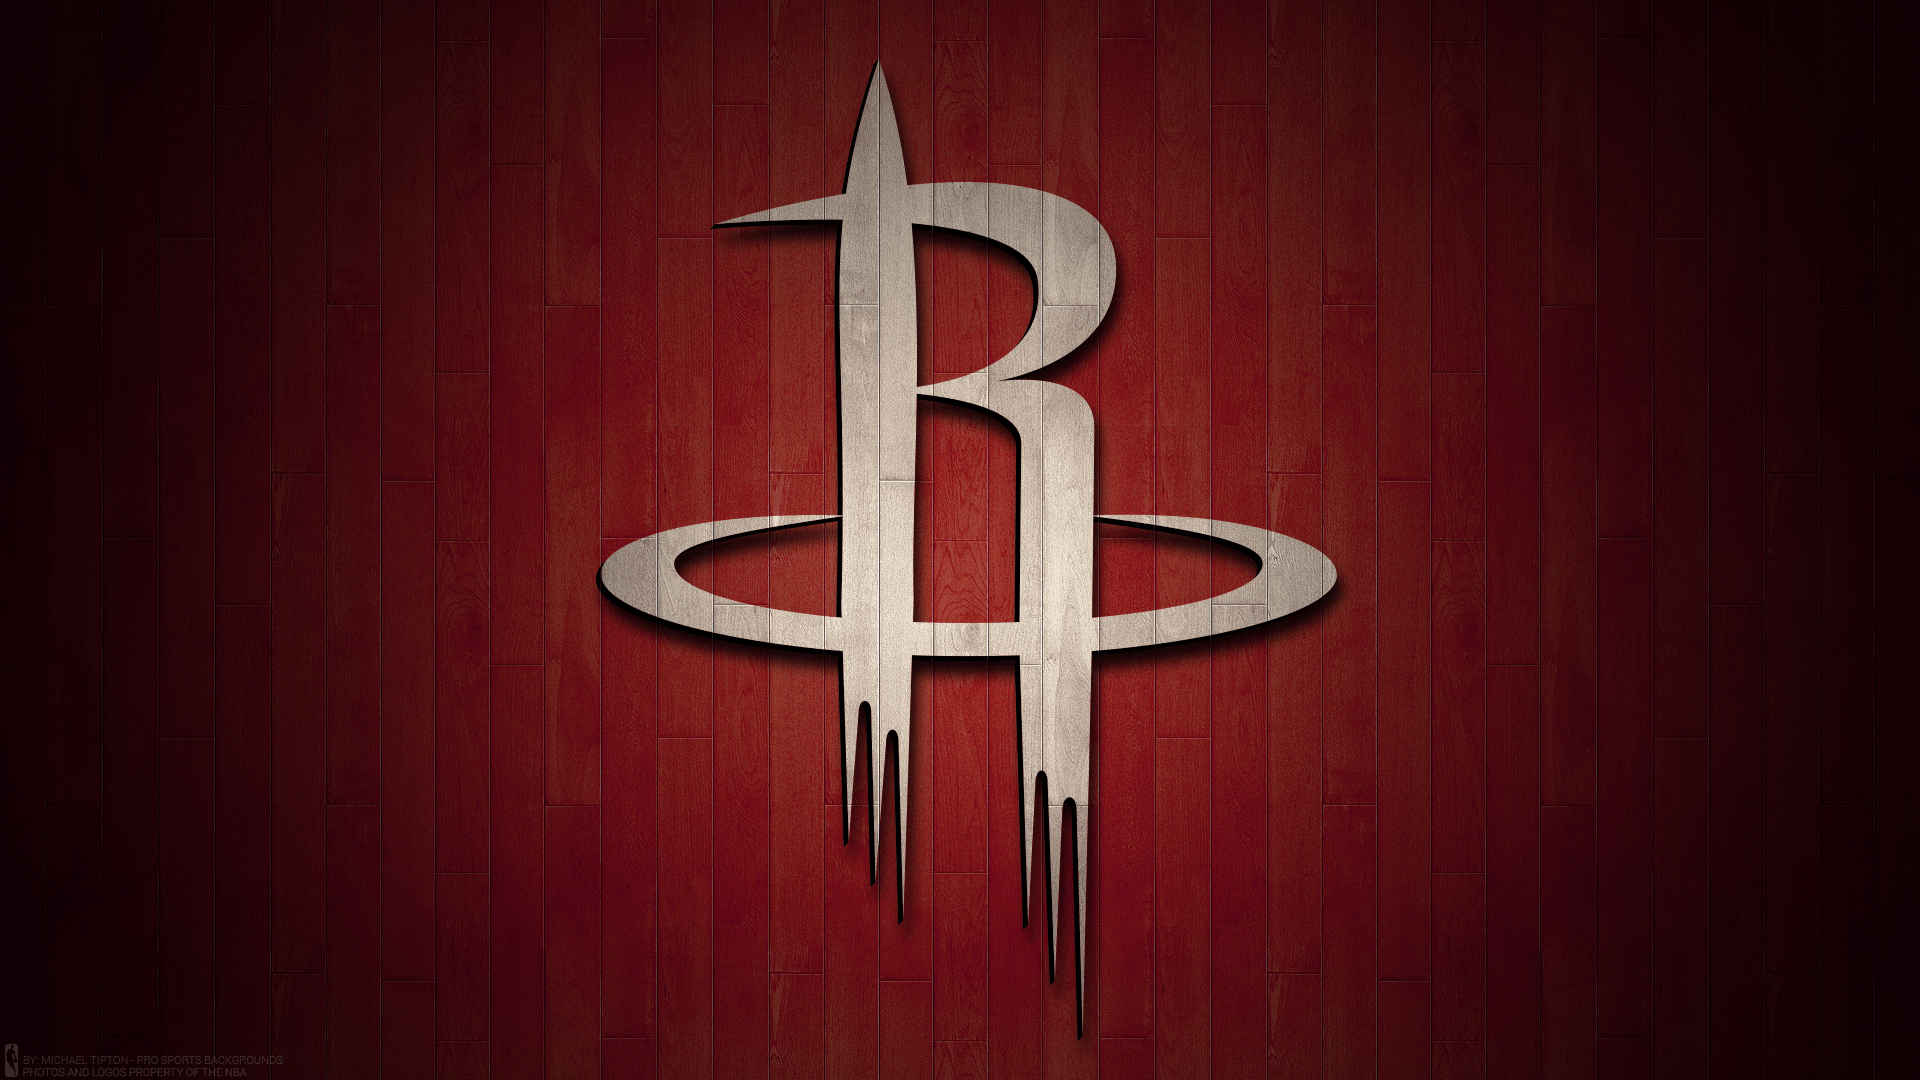 Houston Rockets Wallpaper. iPhone. Android